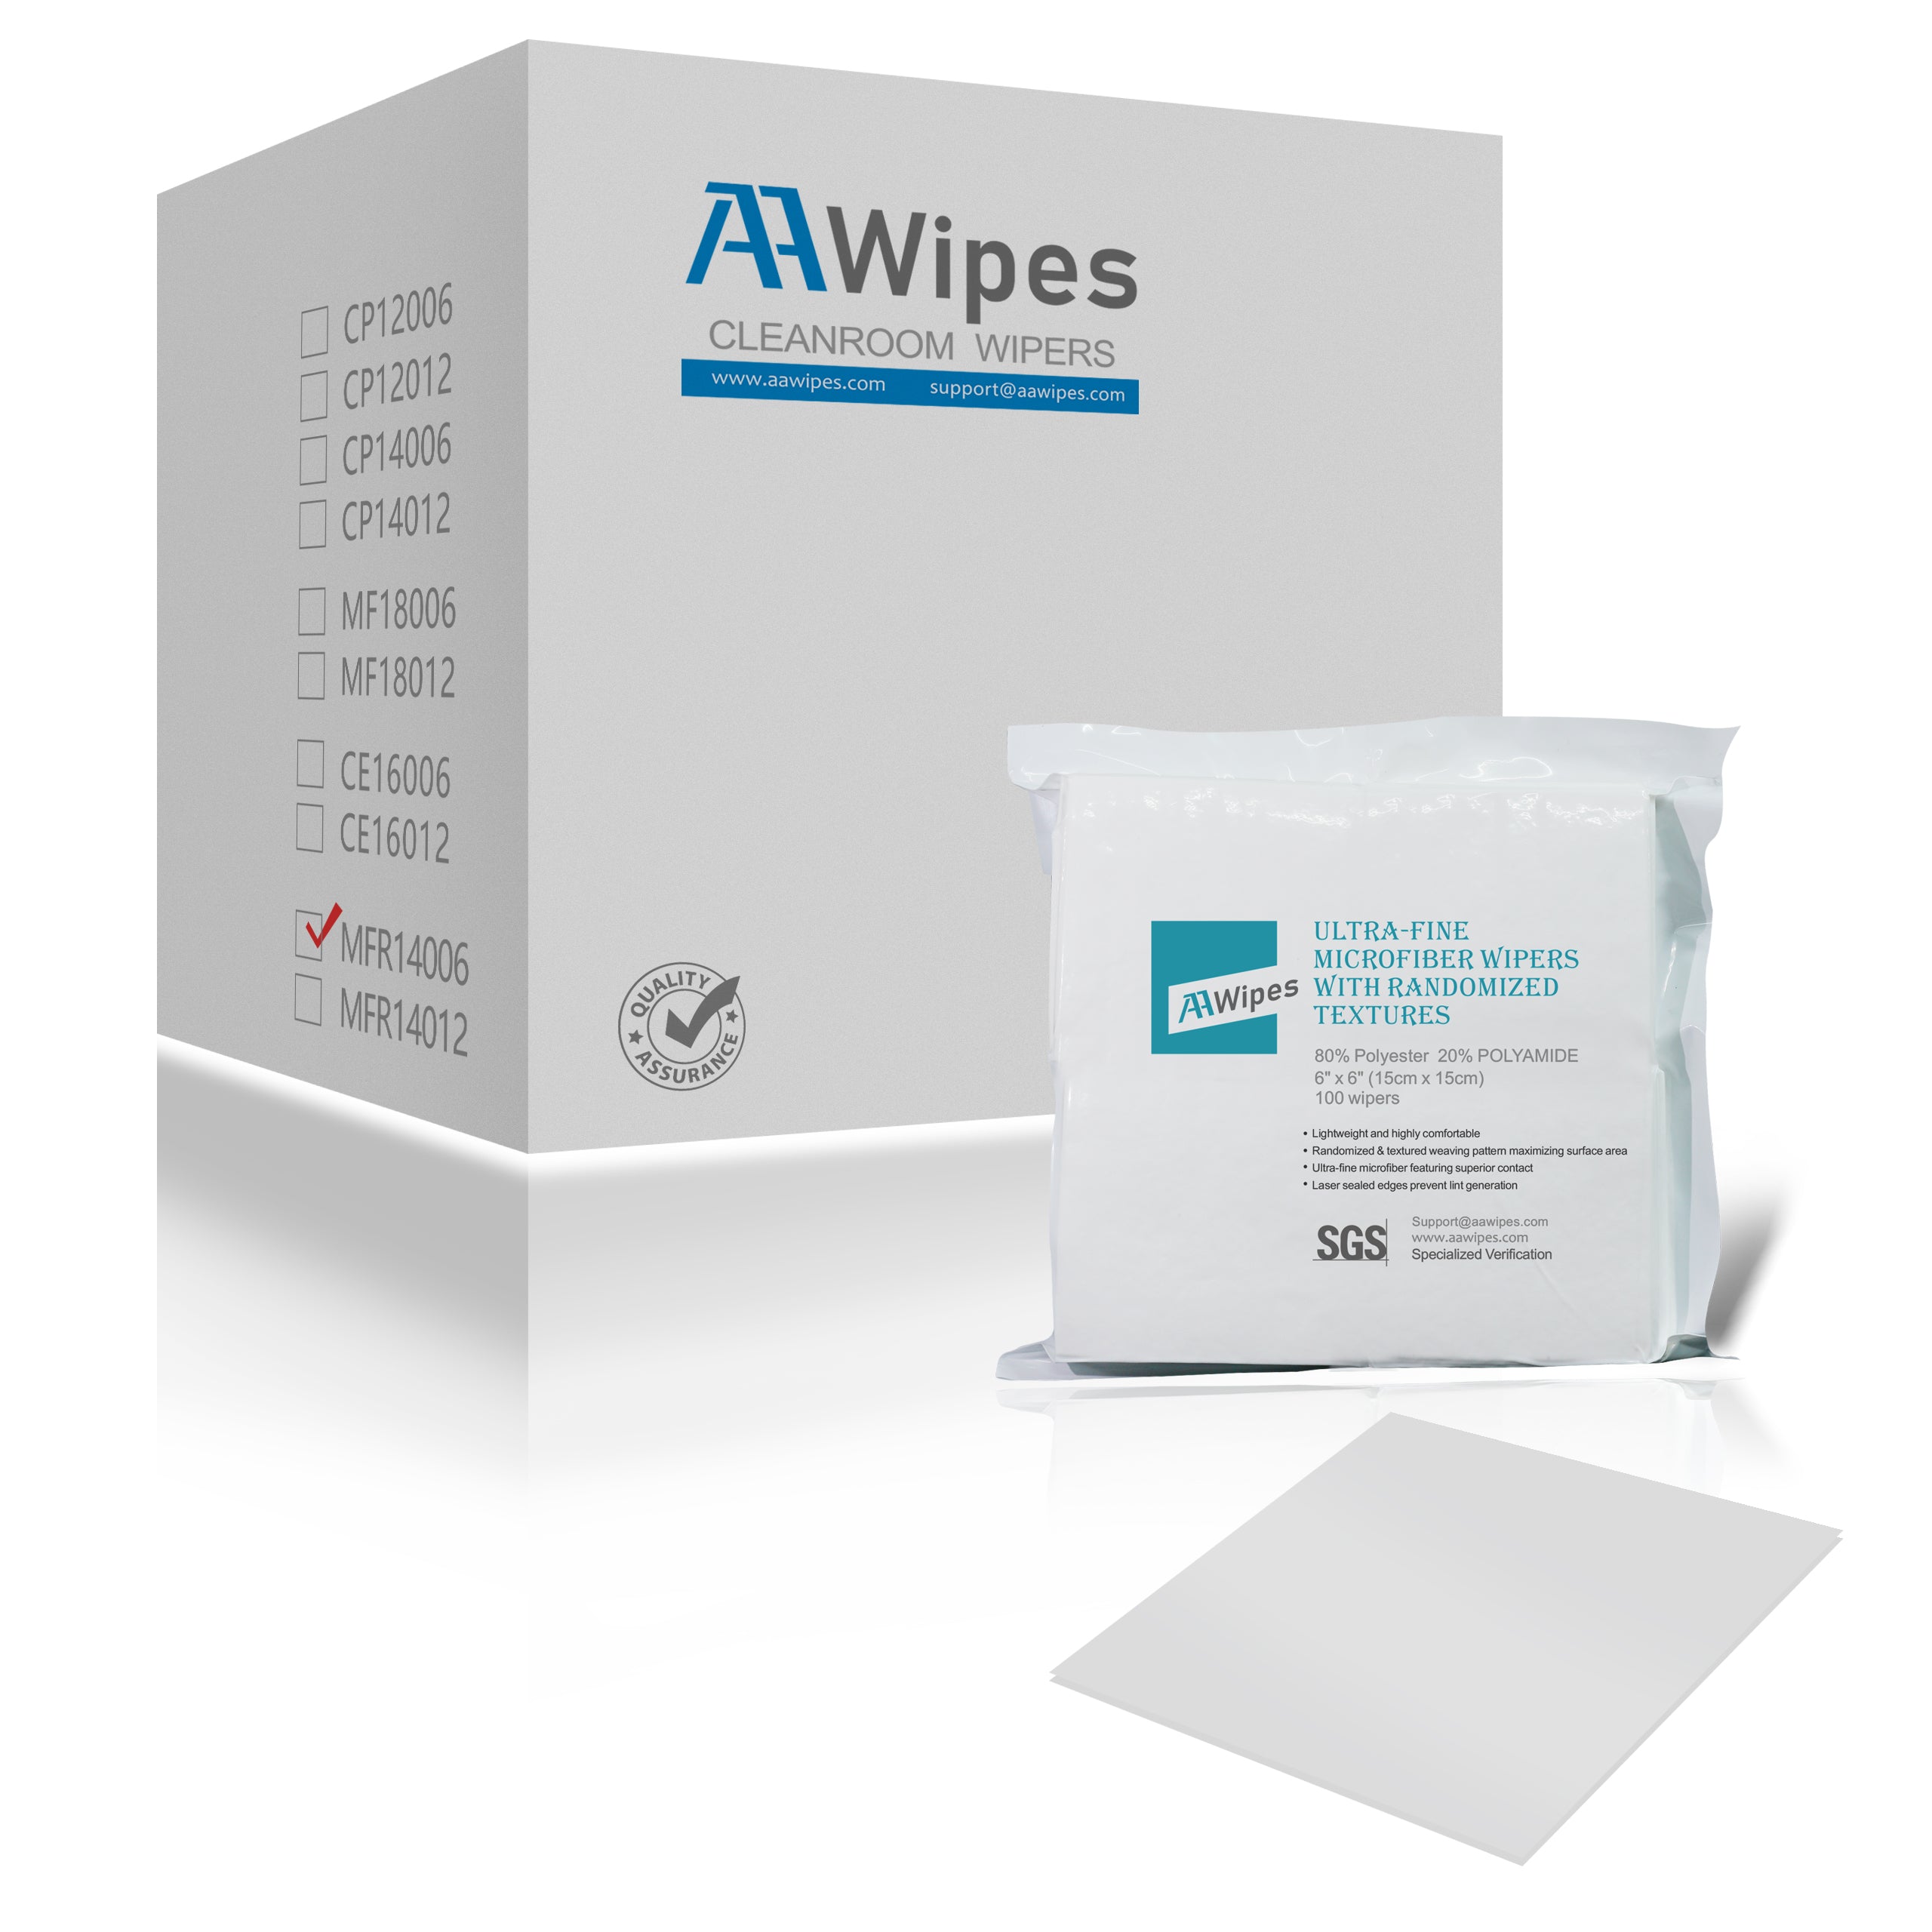 Superfine Microfiber Wipes Irregular Woven Linen 6"x6" (Starting at 1 Box 5,000 Wipes per 50 Bags) (No. MFR14006)